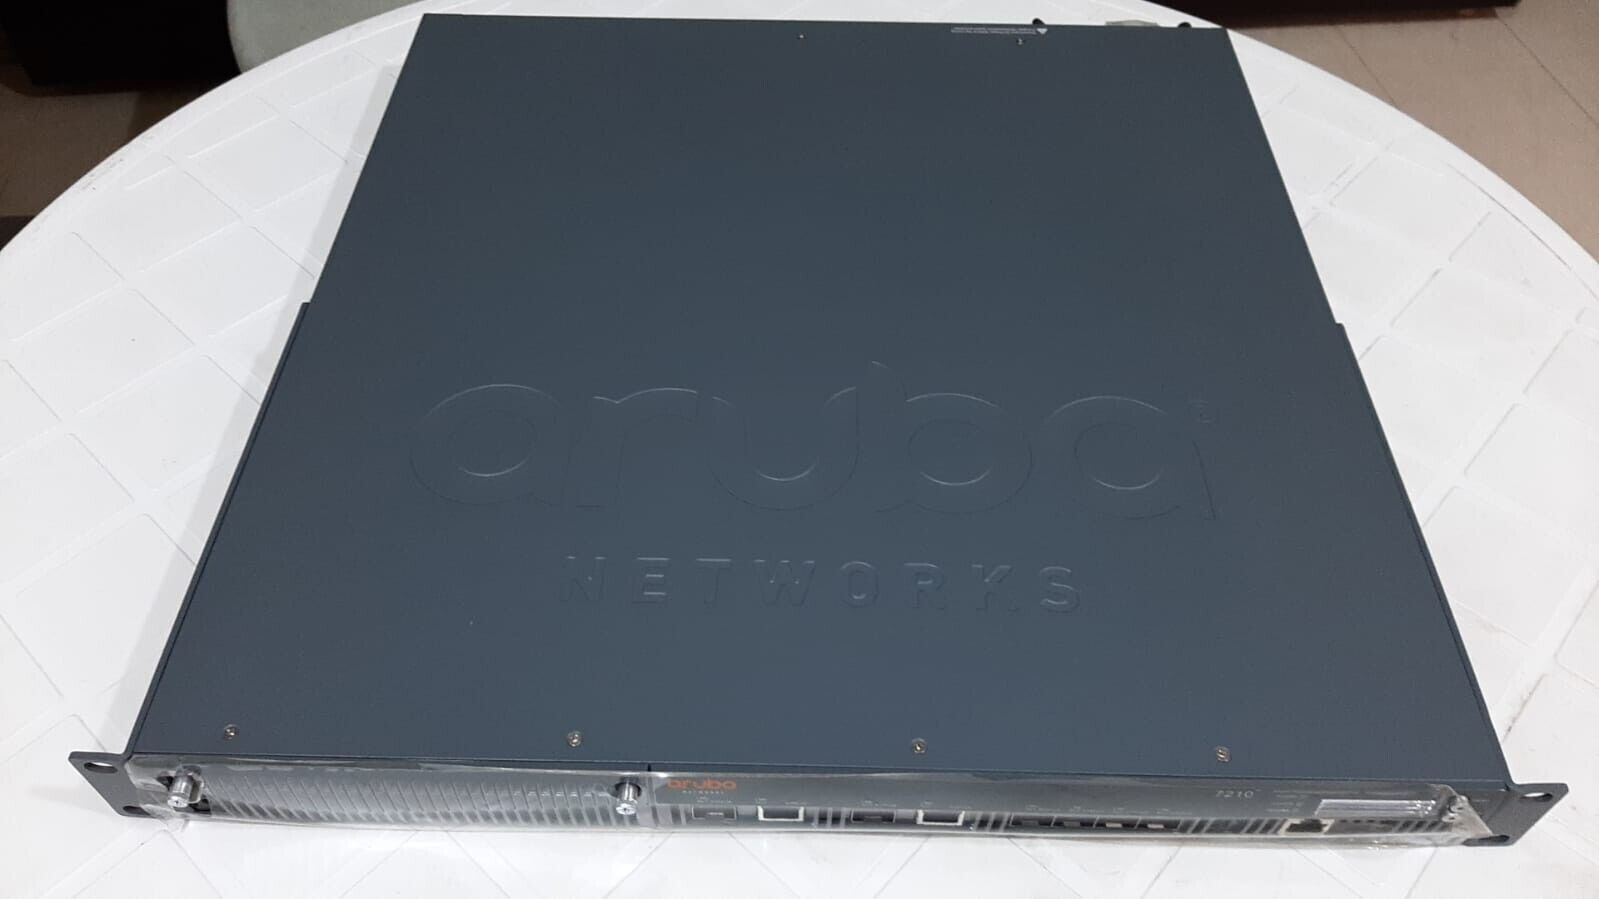 7210-US Mobility Controller Network management device Aruba Networks